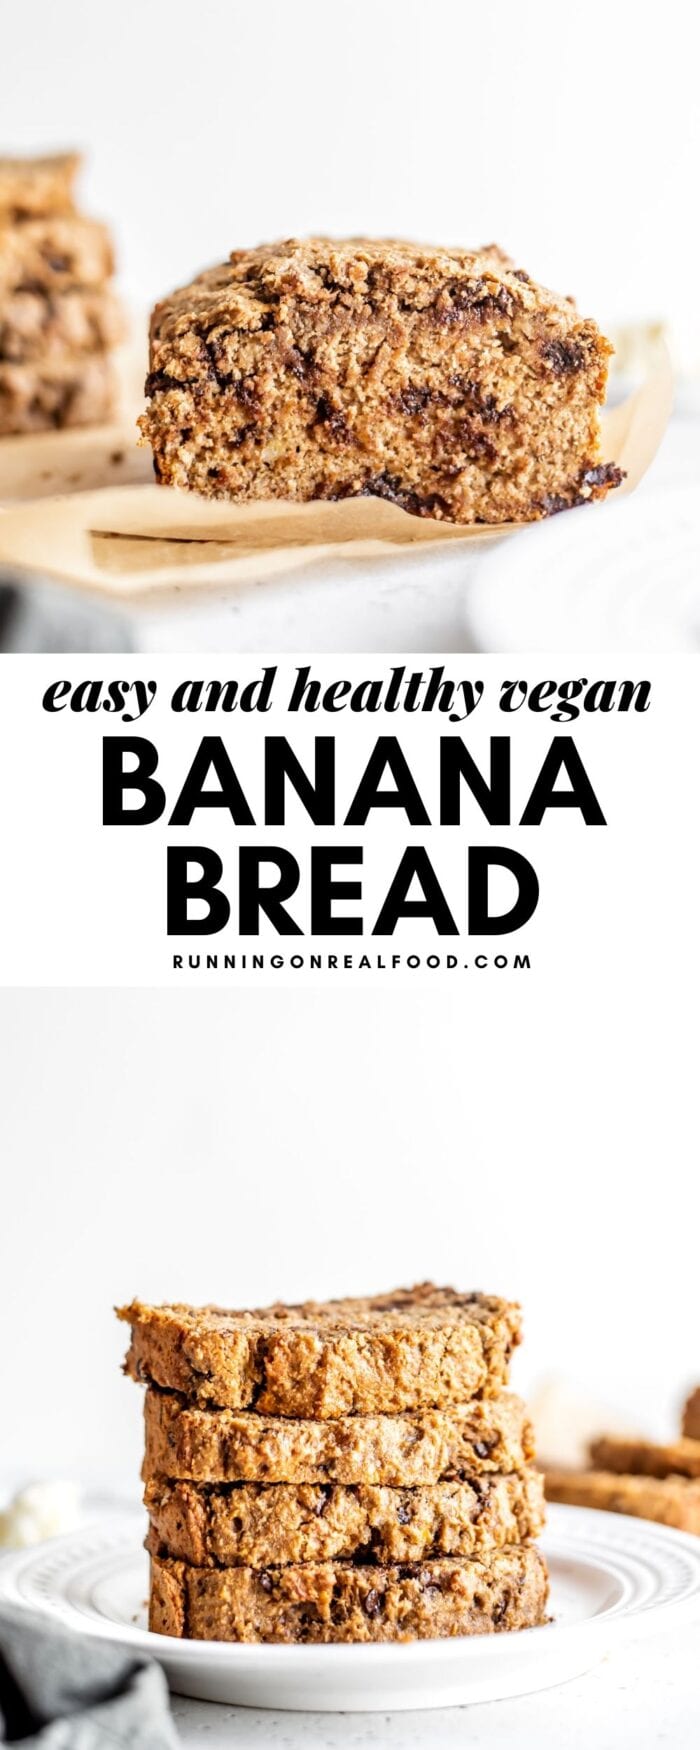 Pinterest graphic collage with 2 images of banana bread and a text overlay.